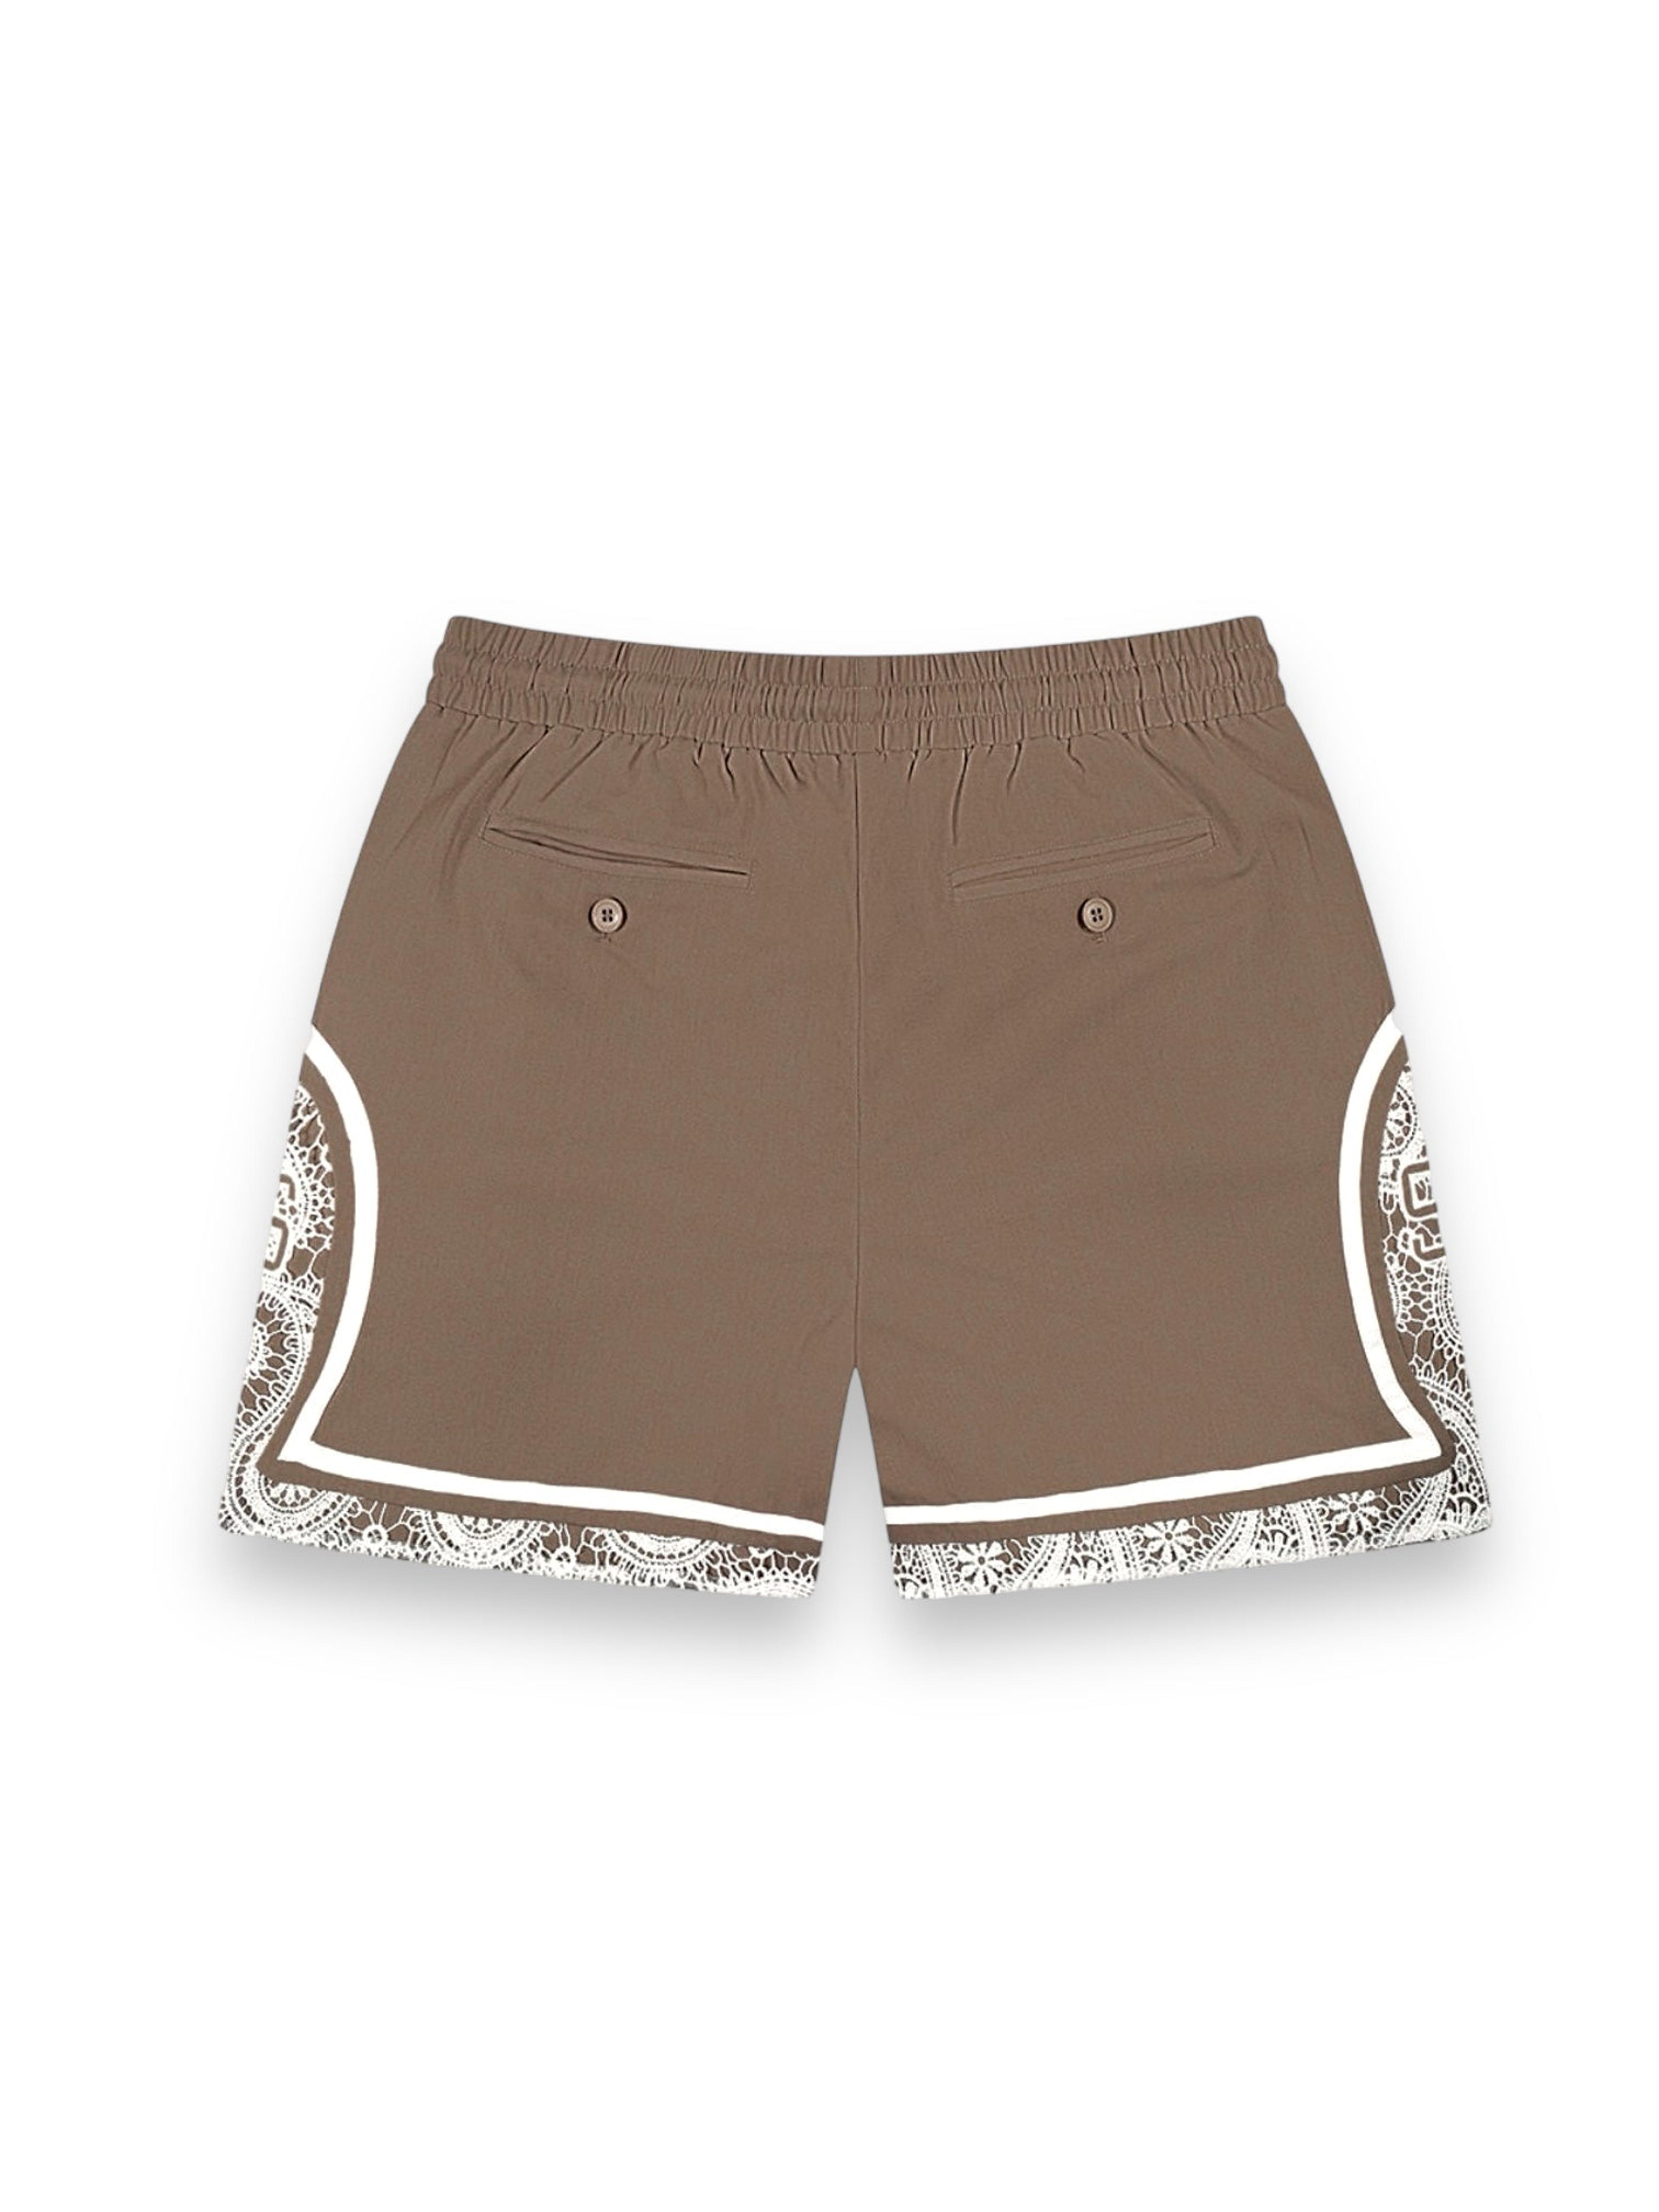 Alternate View 3 of Brown Paisley Linen Shorts